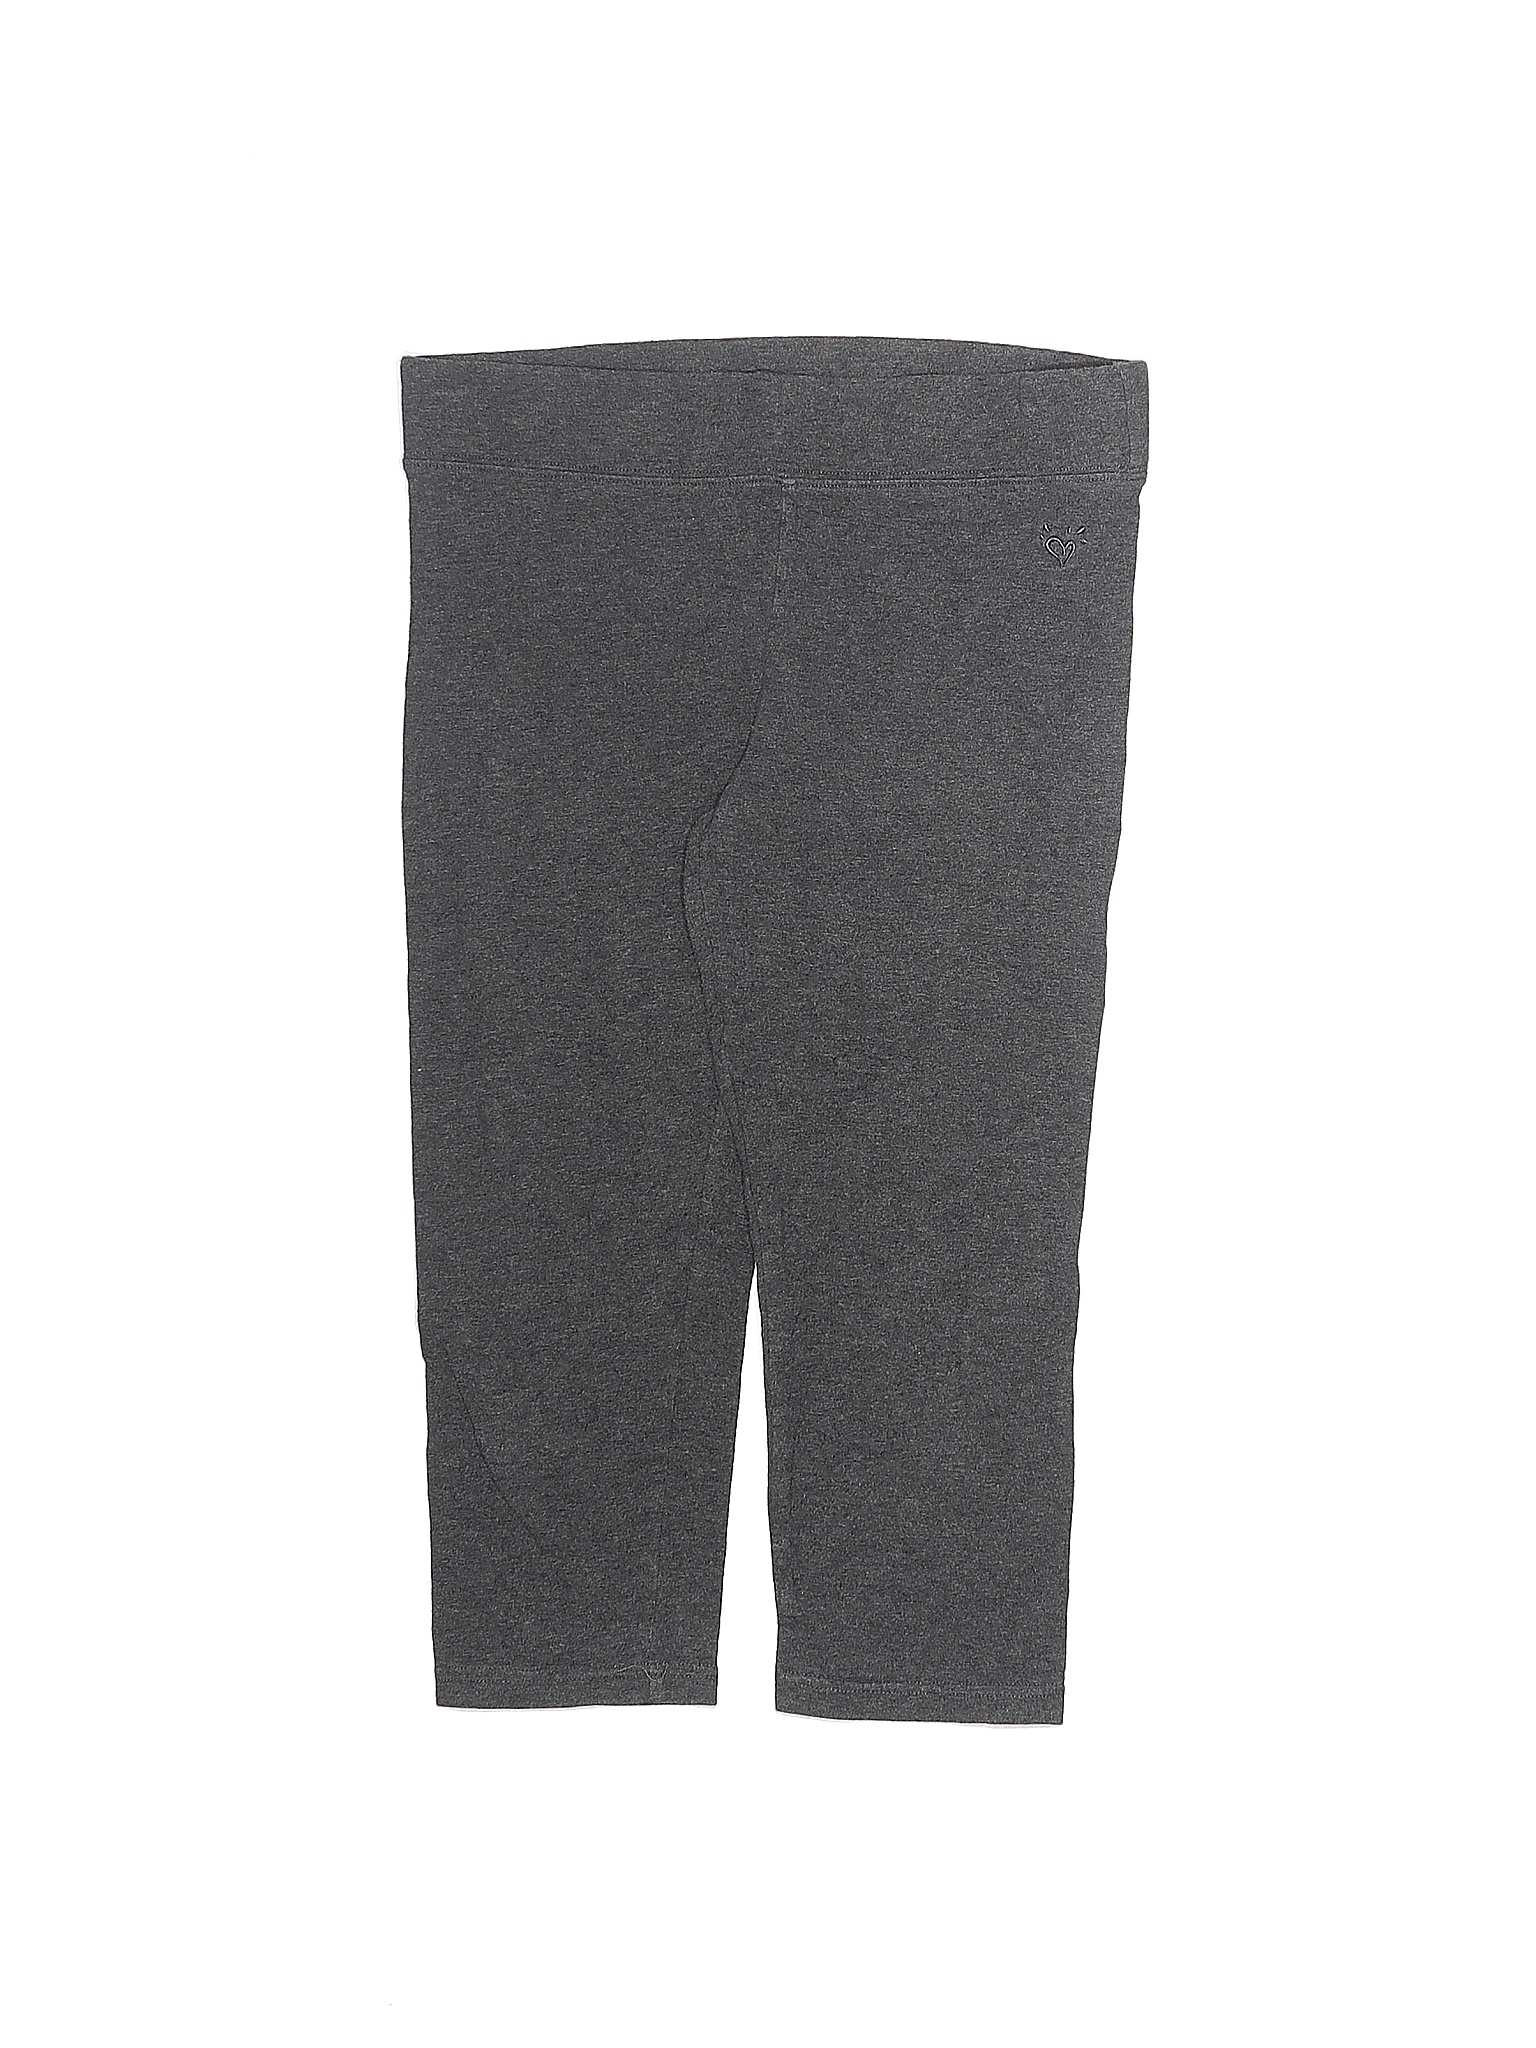 Justice Solid Gray Leggings Size 16 - 55% off